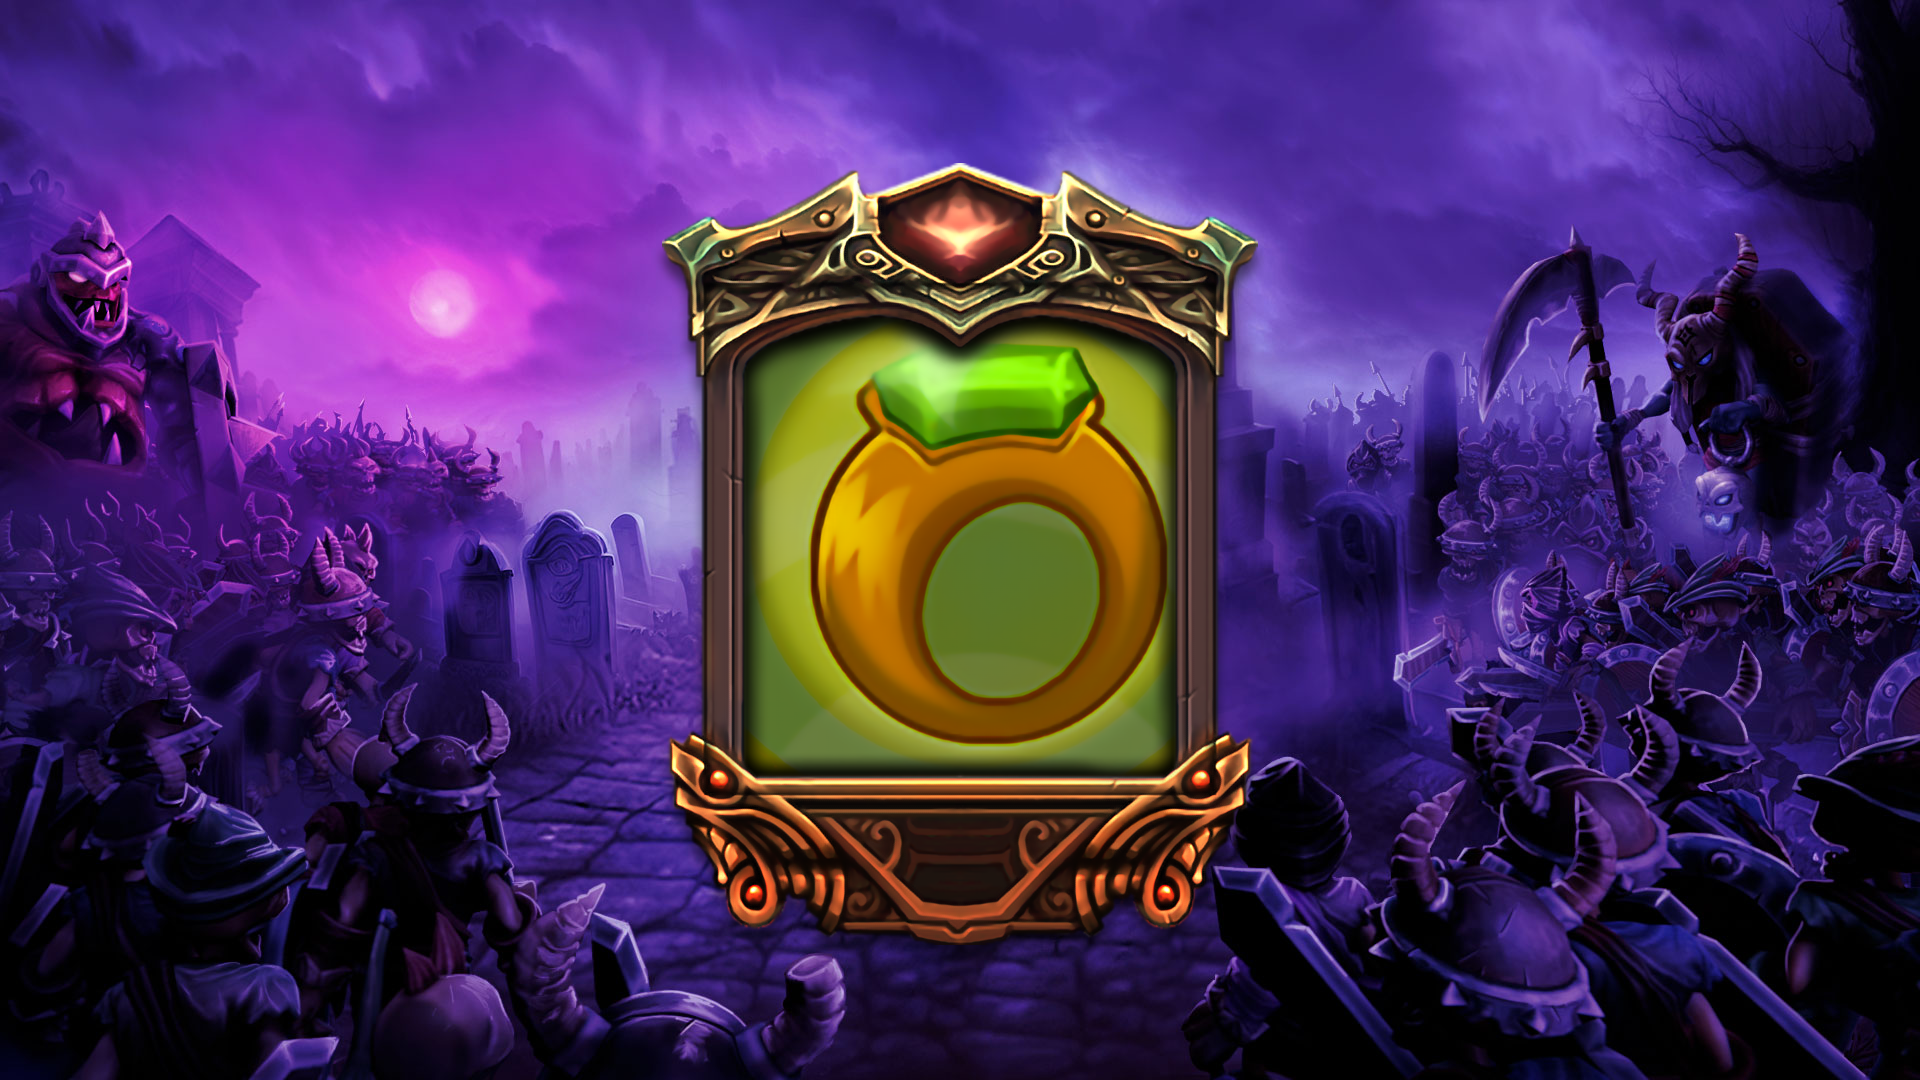 Icon for Emerald Ring